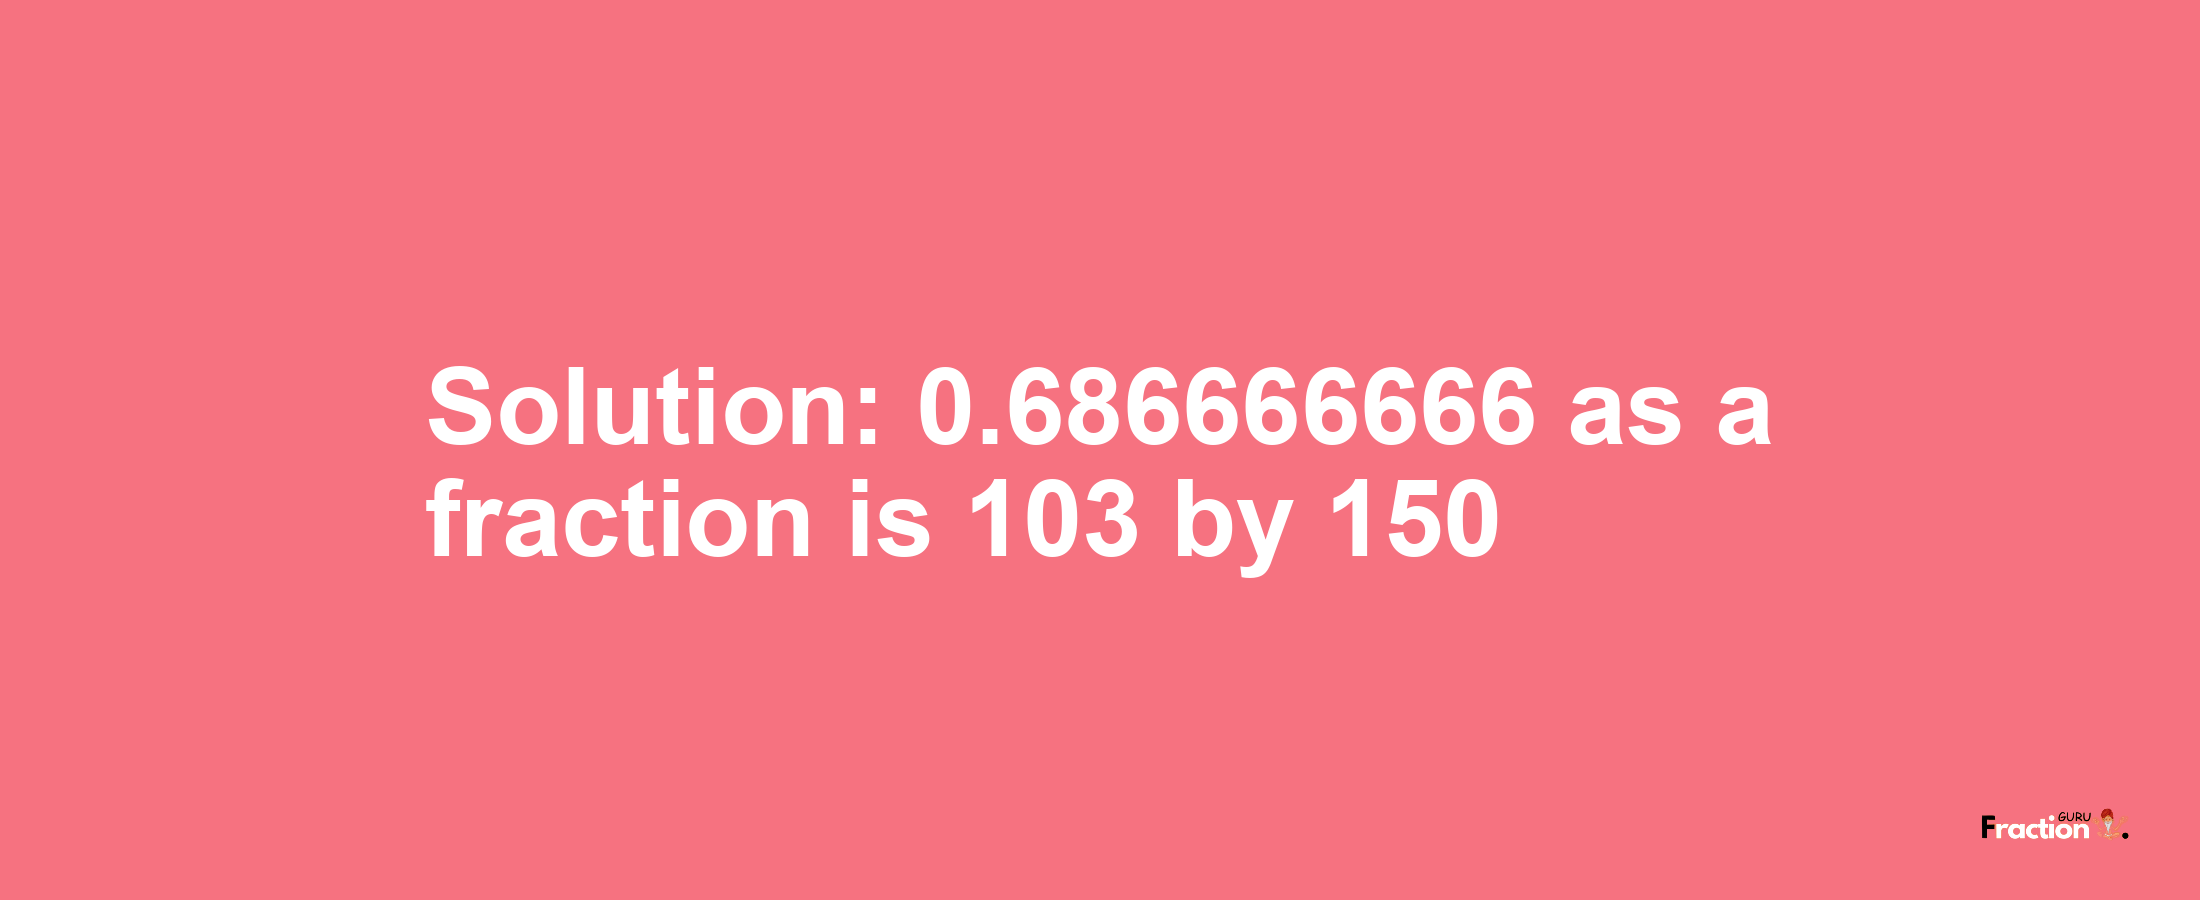 Solution:0.686666666 as a fraction is 103/150